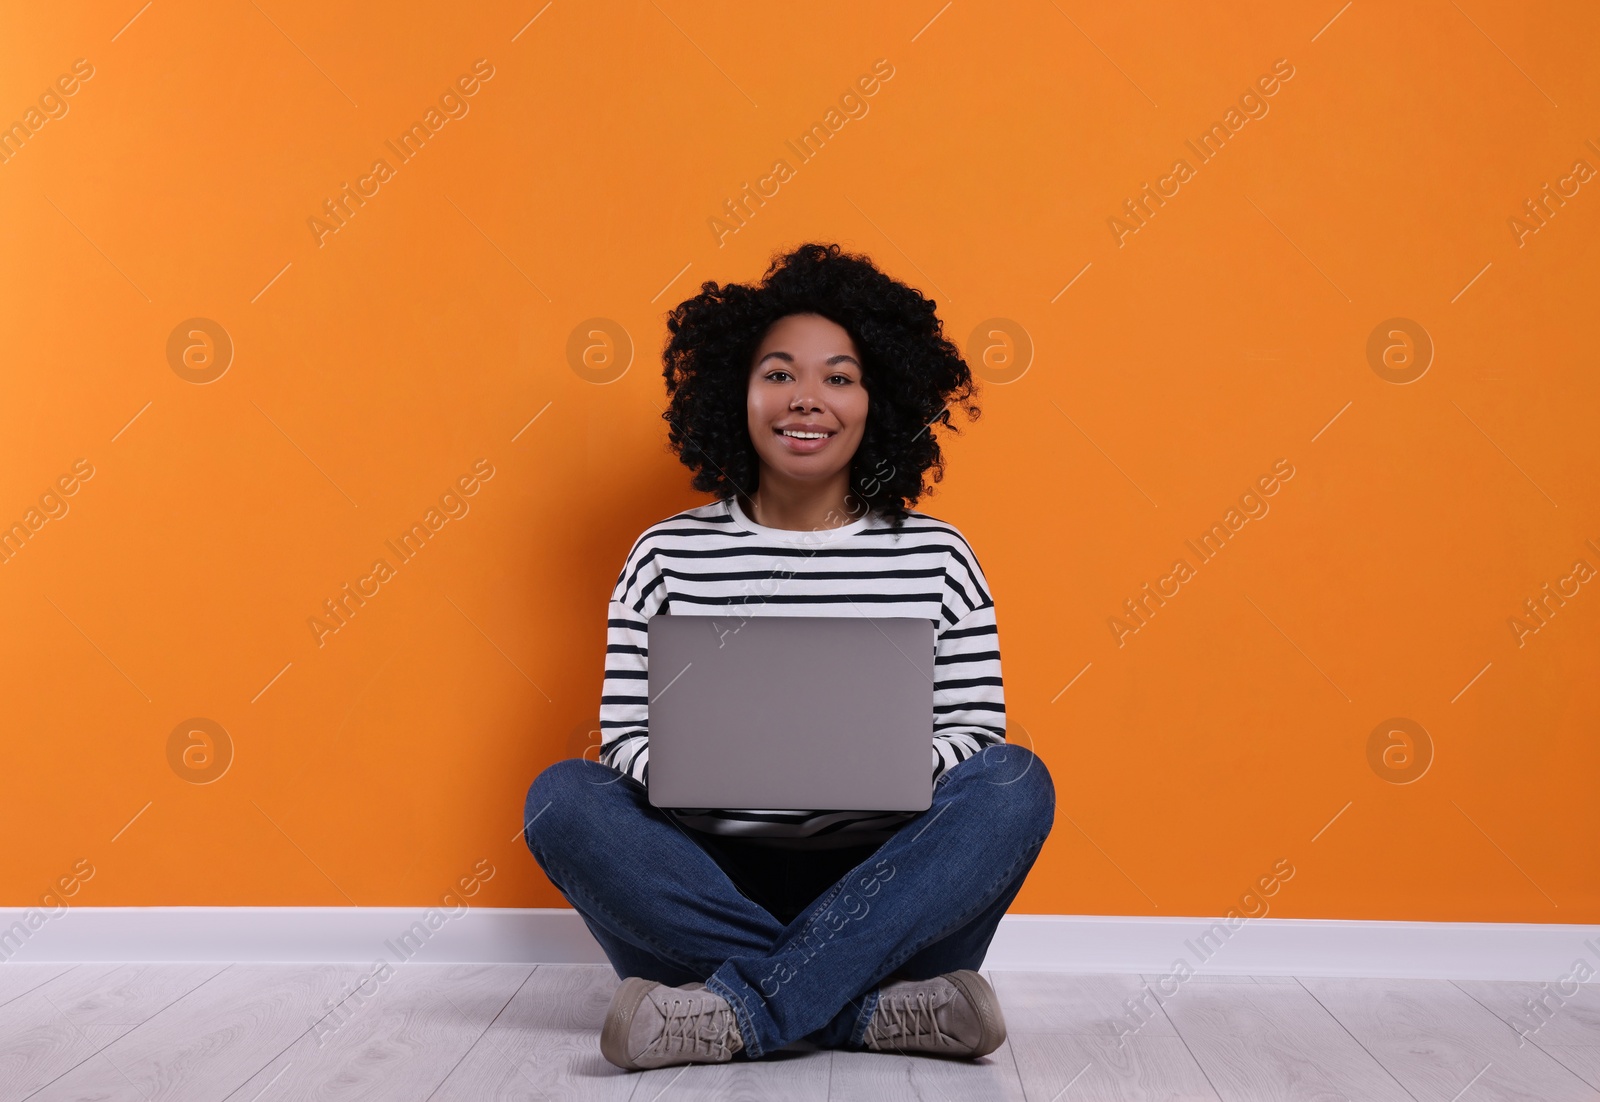 Photo of Happy young woman with laptop sitting near orange wall